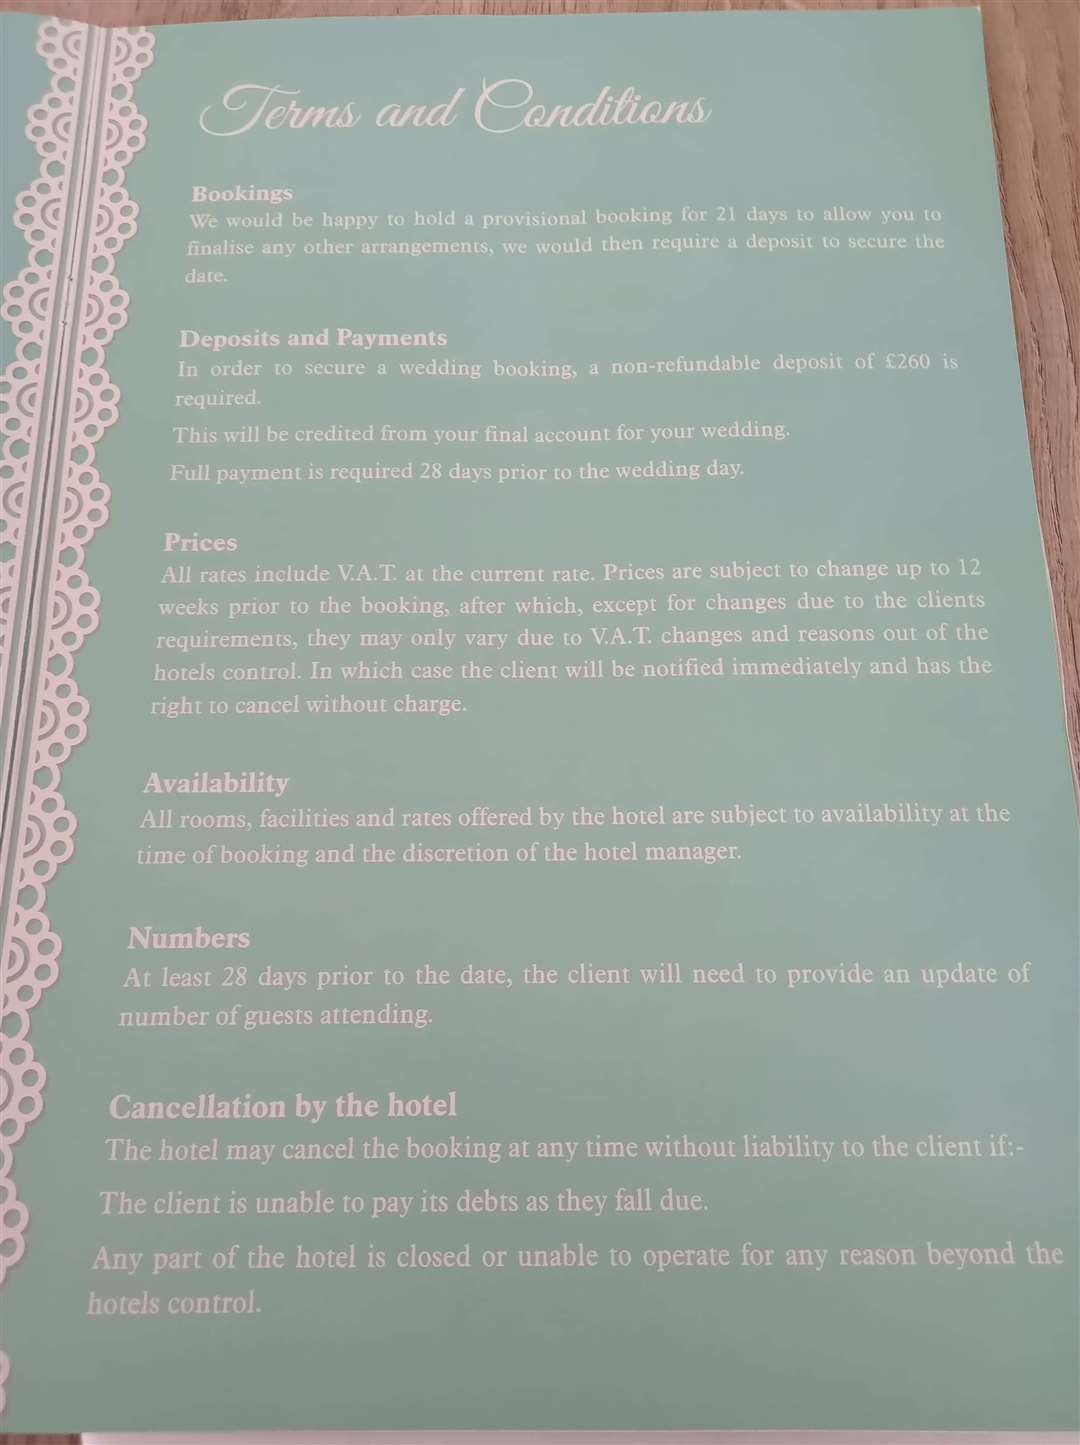 The Abbey Hotel's terms and conditions